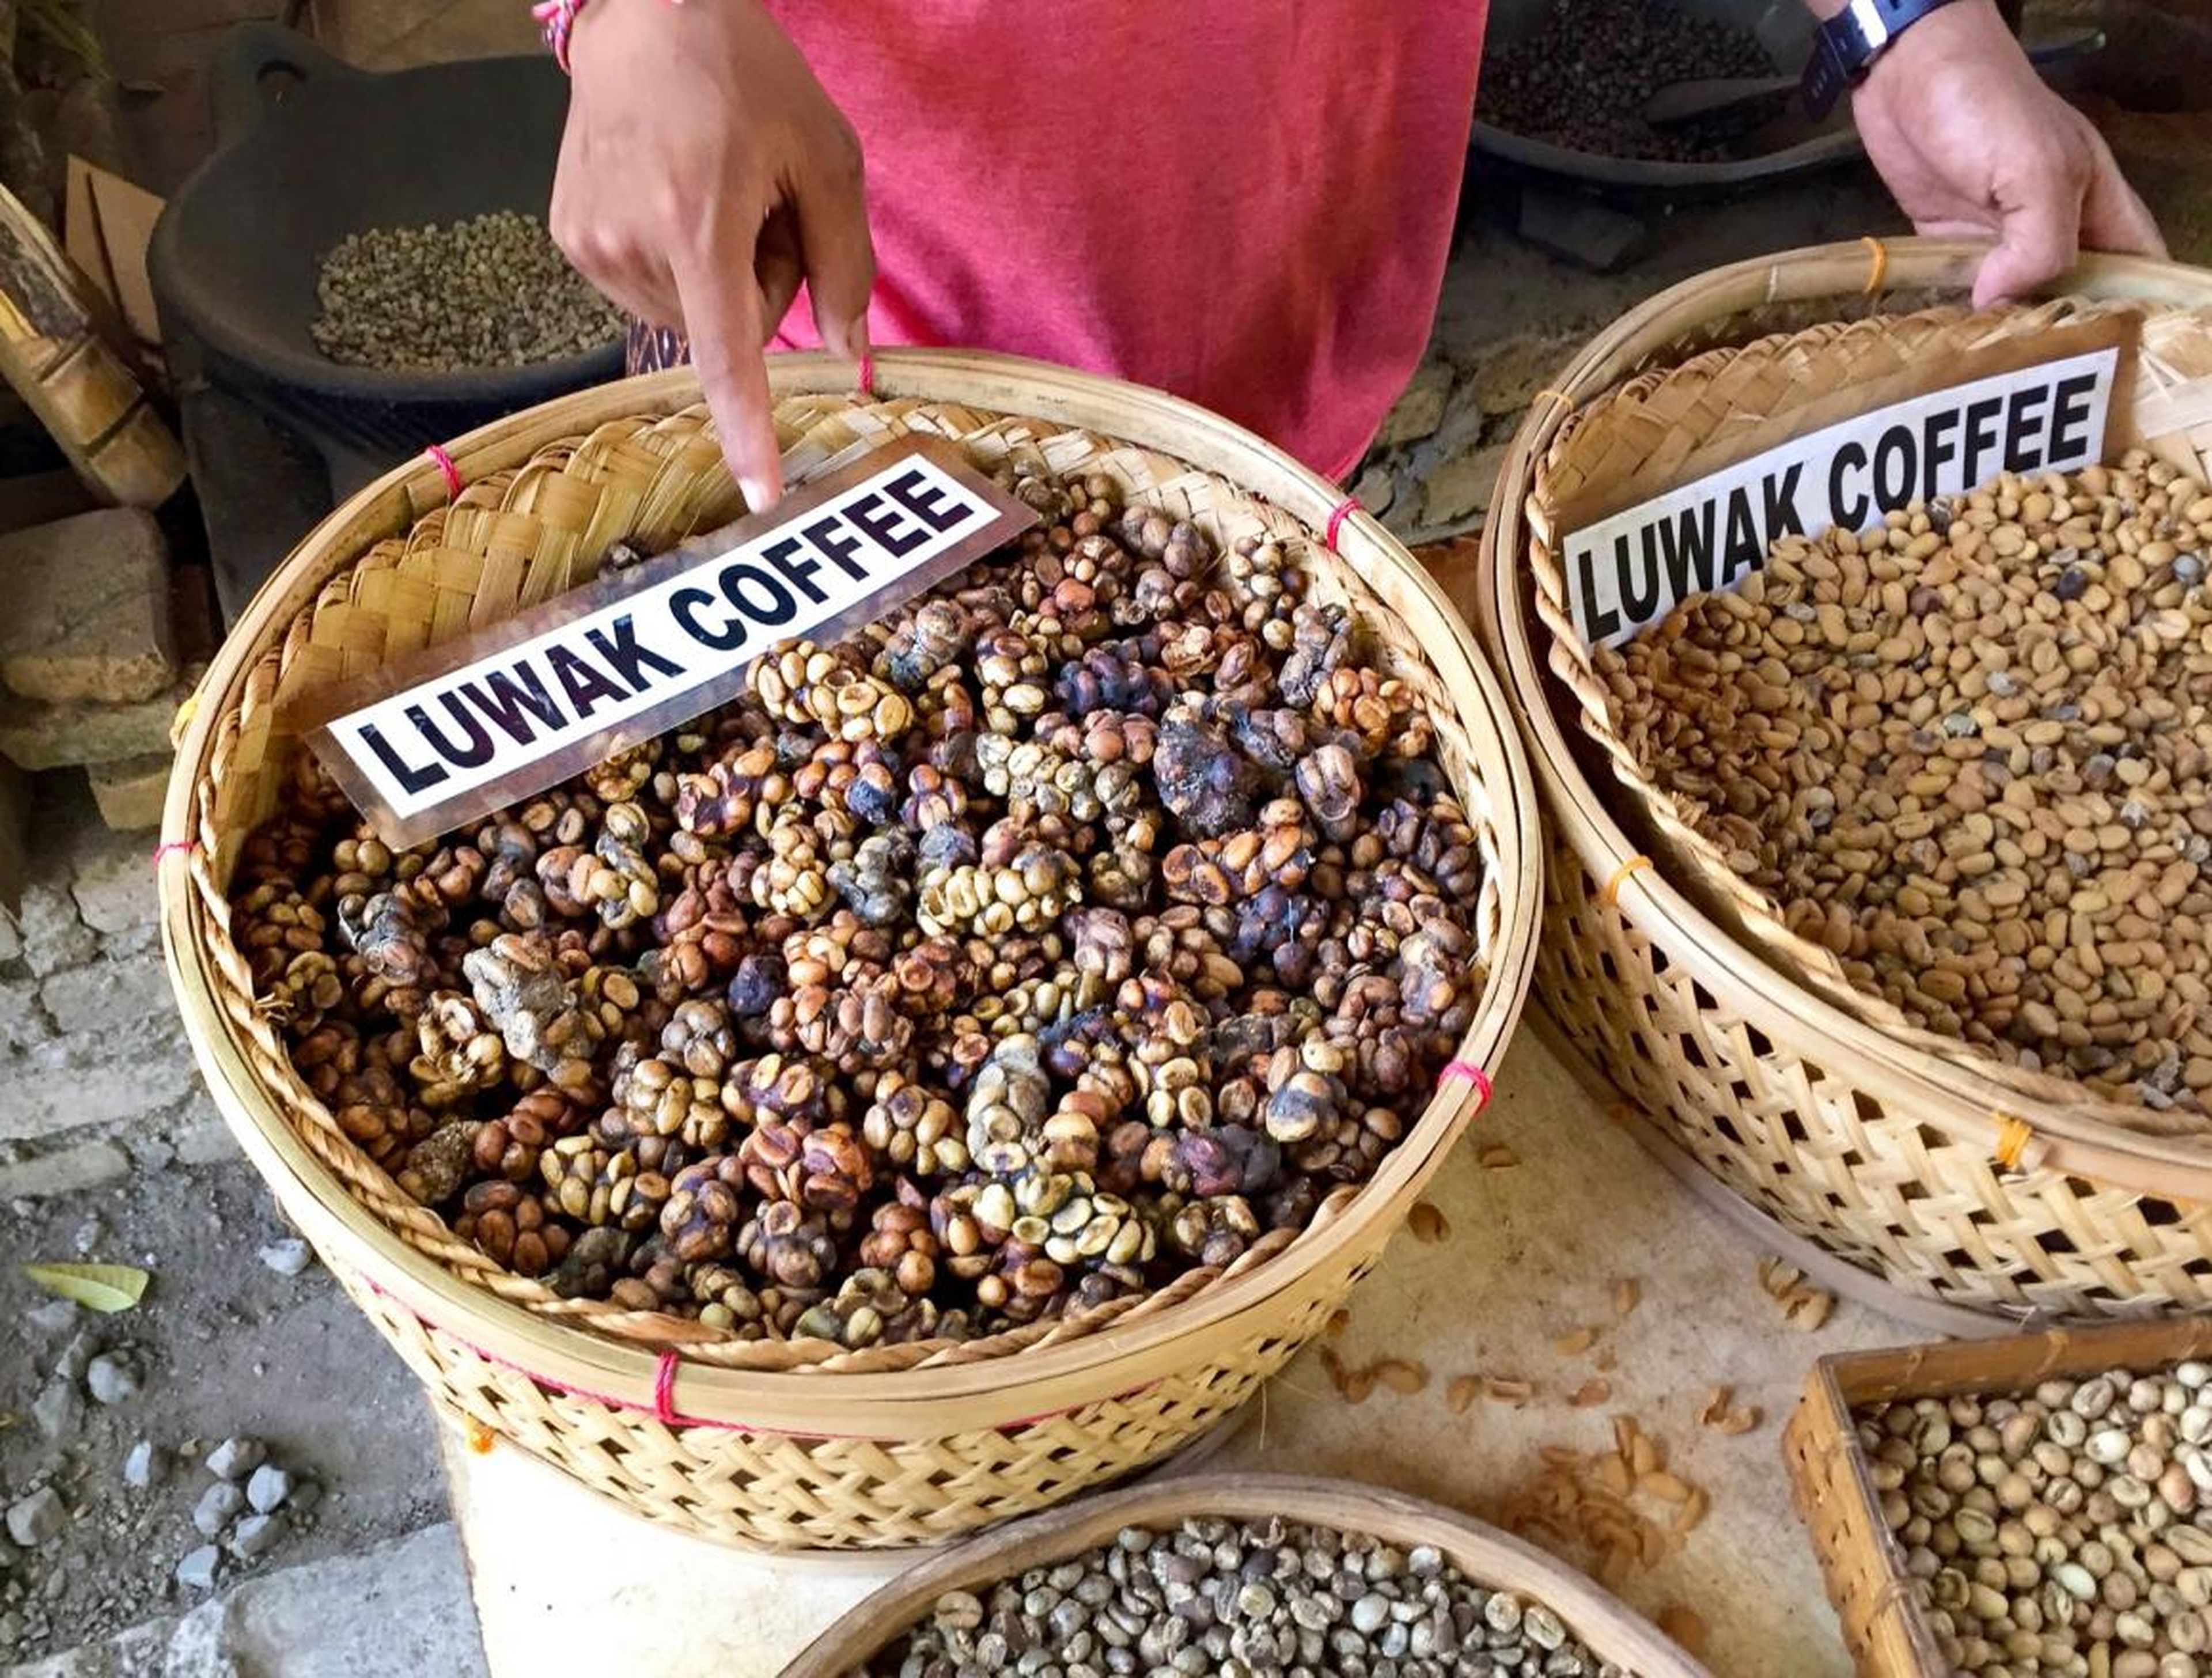 Before getting to Bali, I had been told by many that I had to try Kopi Luwak, a traditional Balinese coffee considered to be the most expensive coffee in the world.